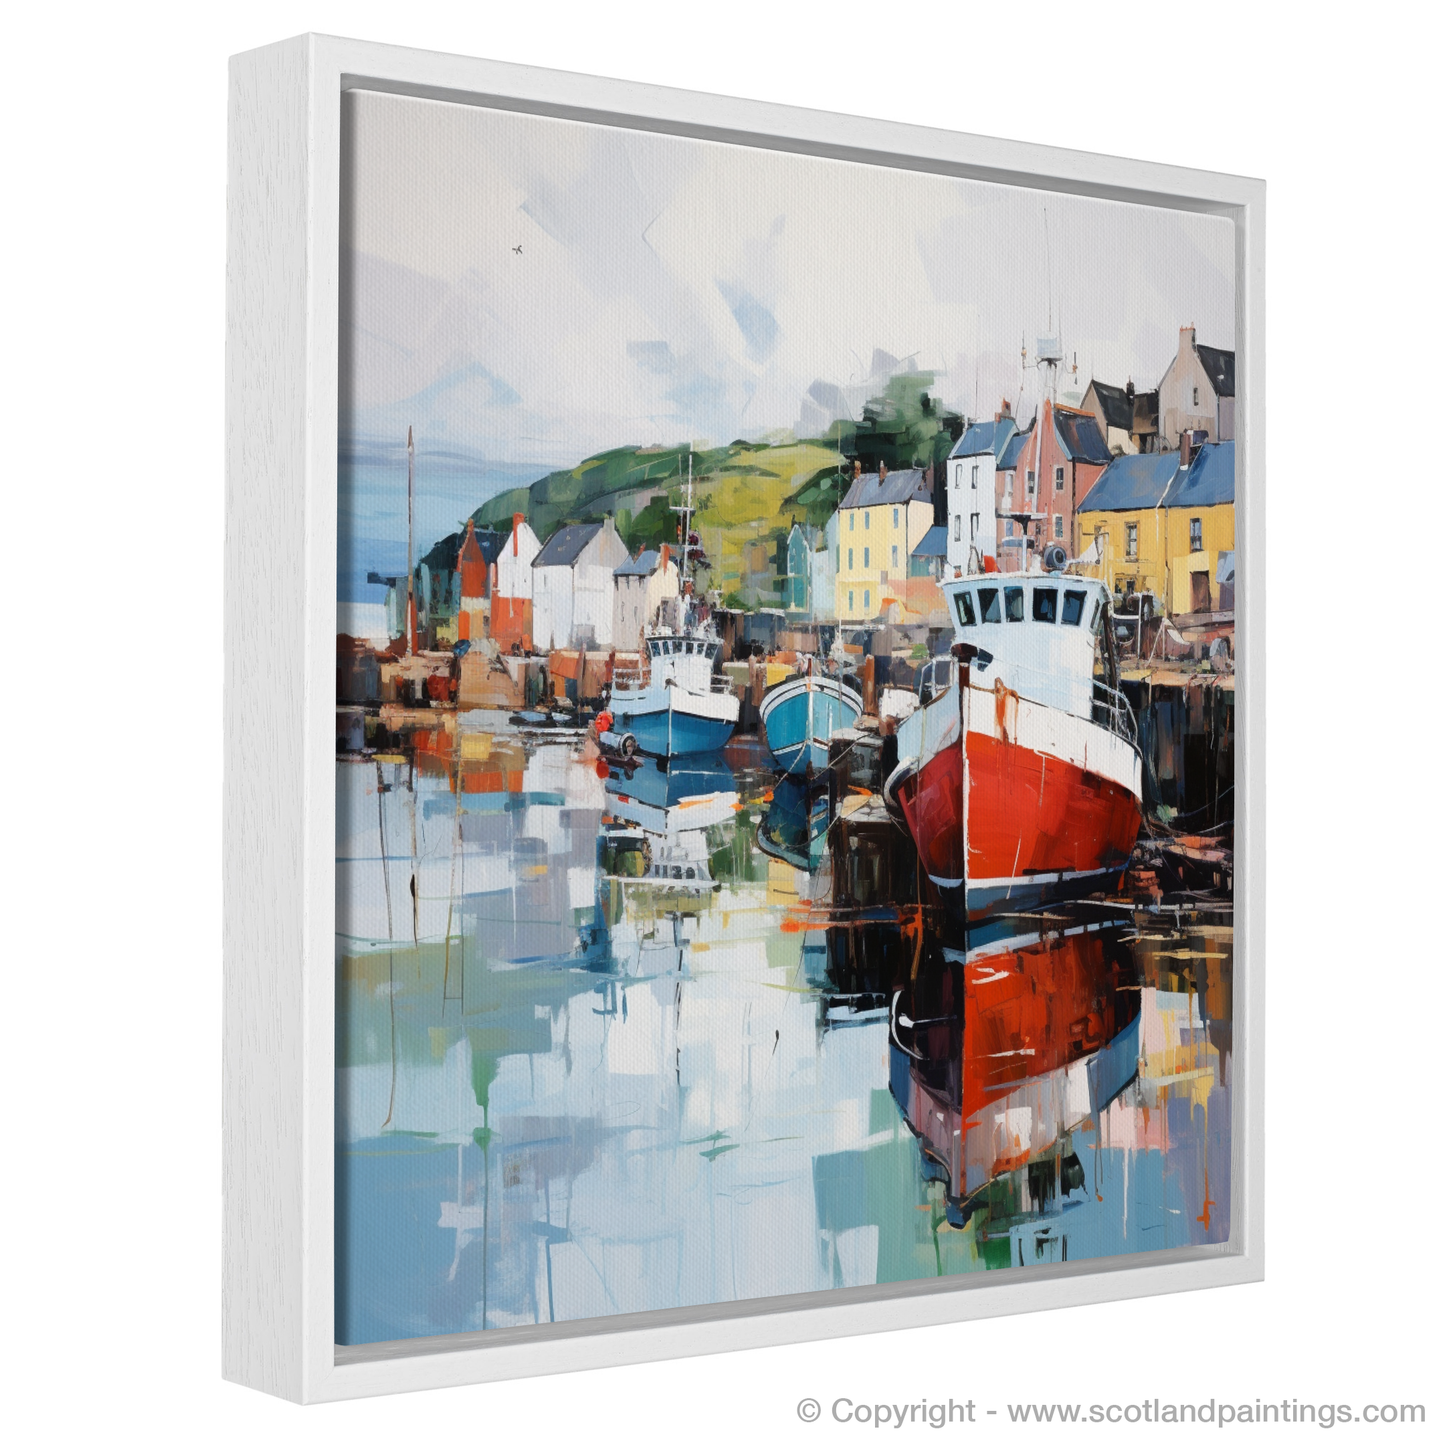 Painting and Art Print of Millport Harbour, Isle of Cumbrae entitled "Millport Harbour Essence: A Dance of Colour and Light".